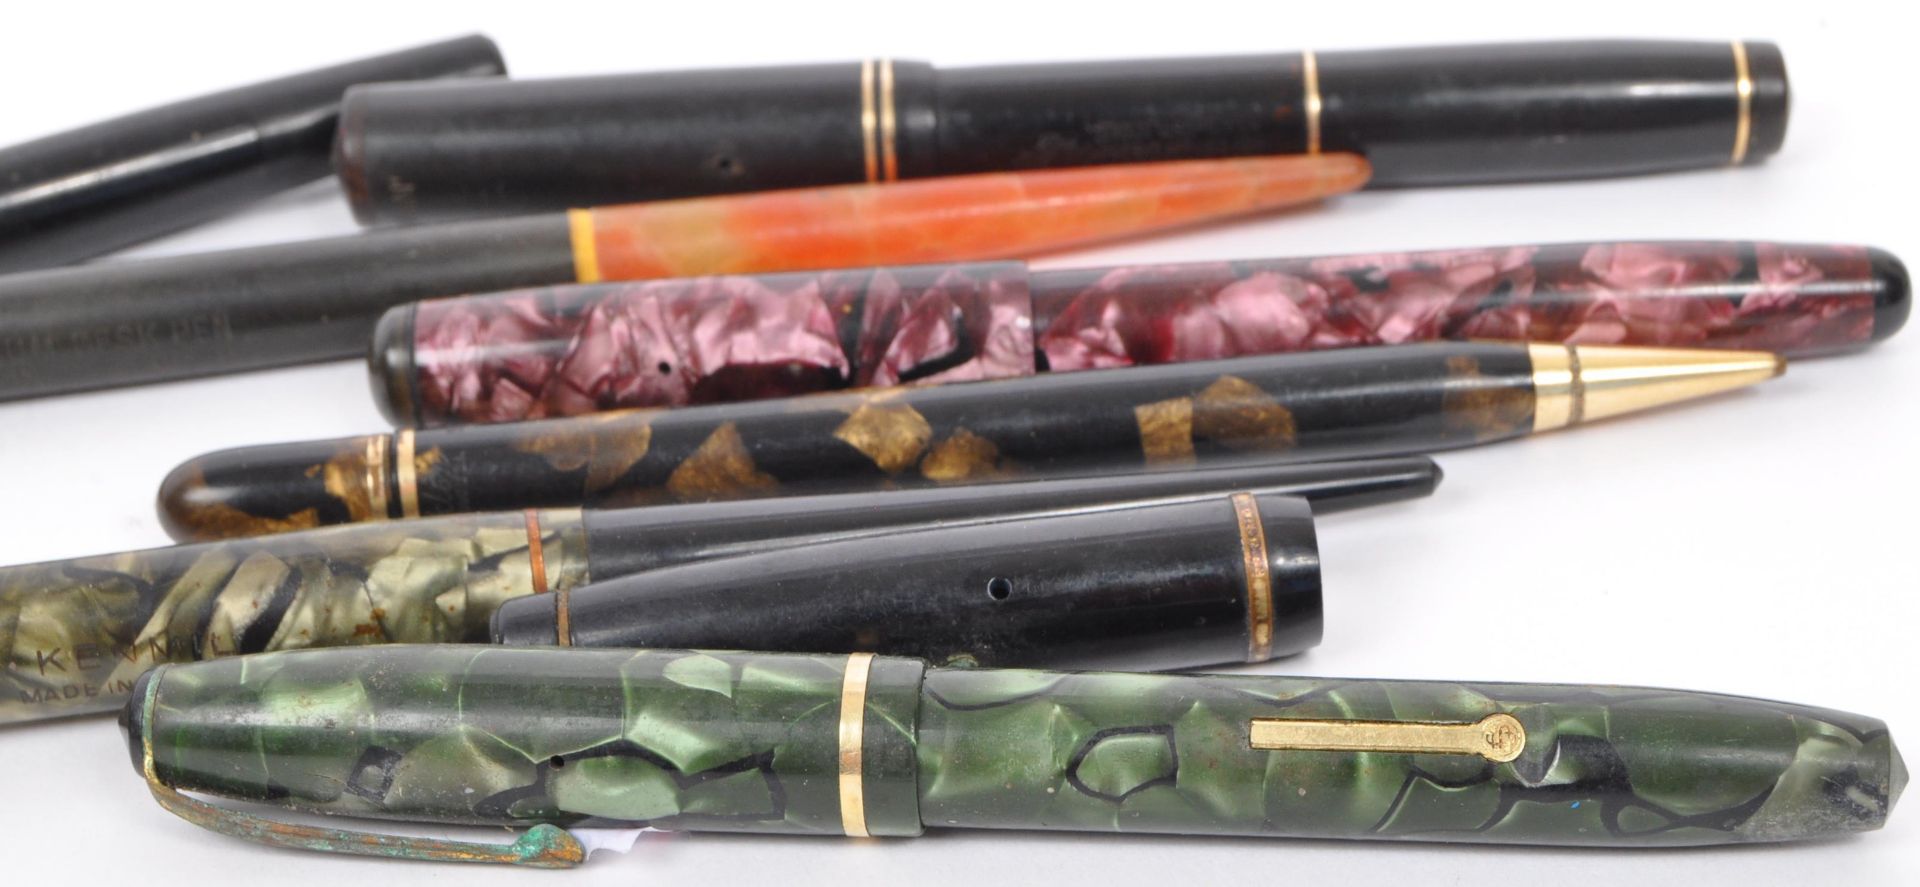 COLLECTION OF VINTAGE FOUNTAIN WRITING DESK PENS - Image 3 of 6